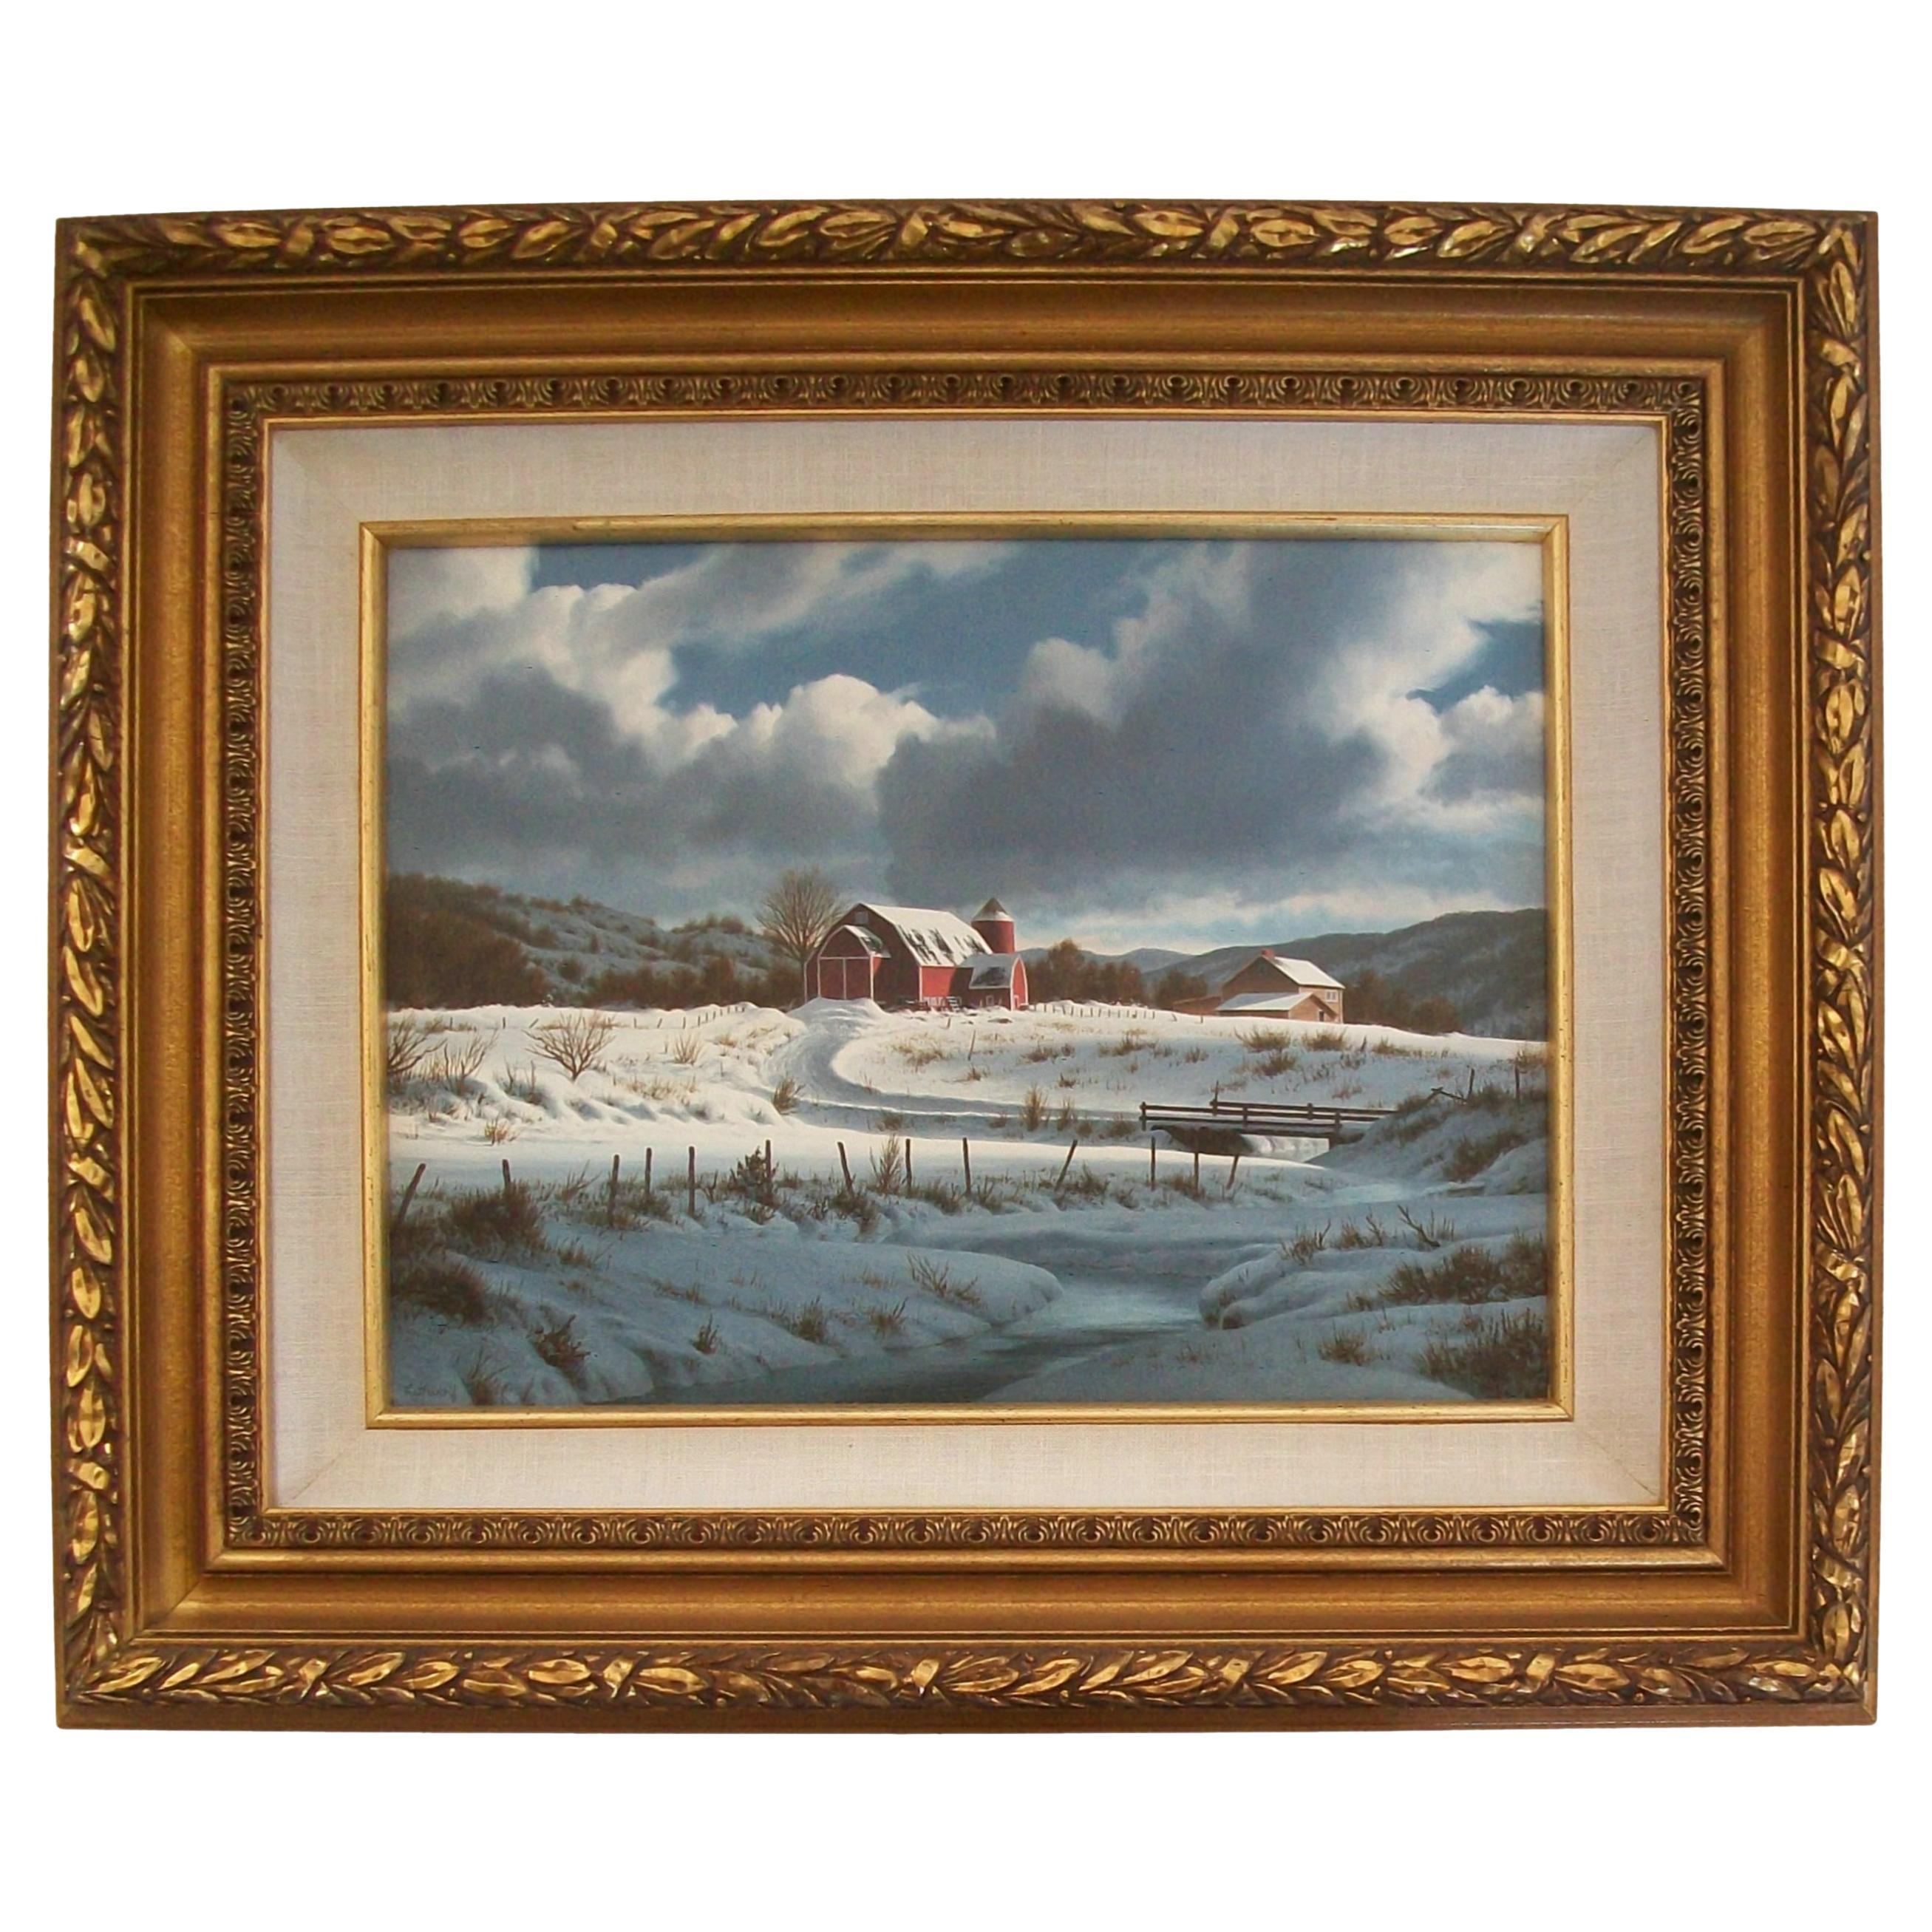 James A. Fetherolf, "Memories", Framed Oil Painting, U.S., Late 20th Century For Sale